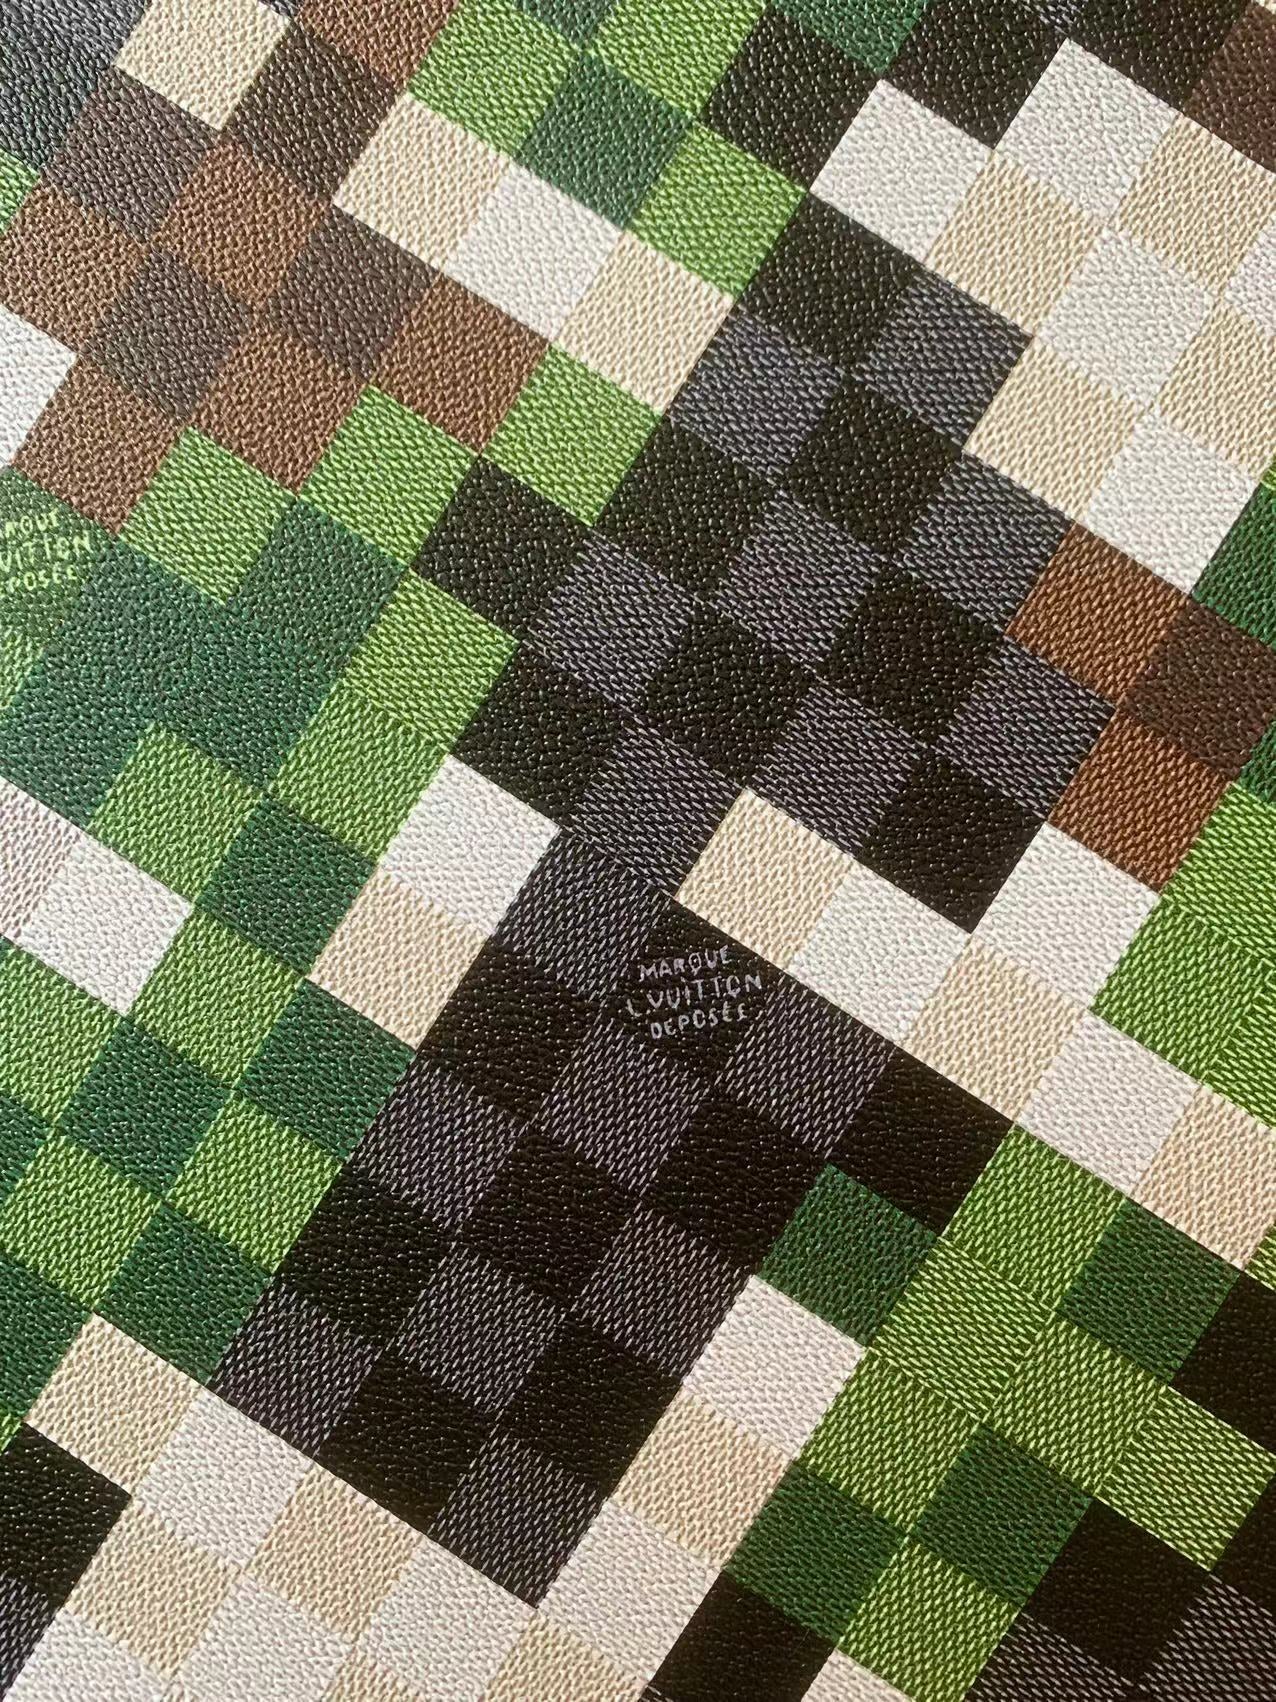 Craft Plaid New Camouflage Louis Vuitton Vinyl Leather Fabric For Handmade Bag Sneaker Upholstery By Yard